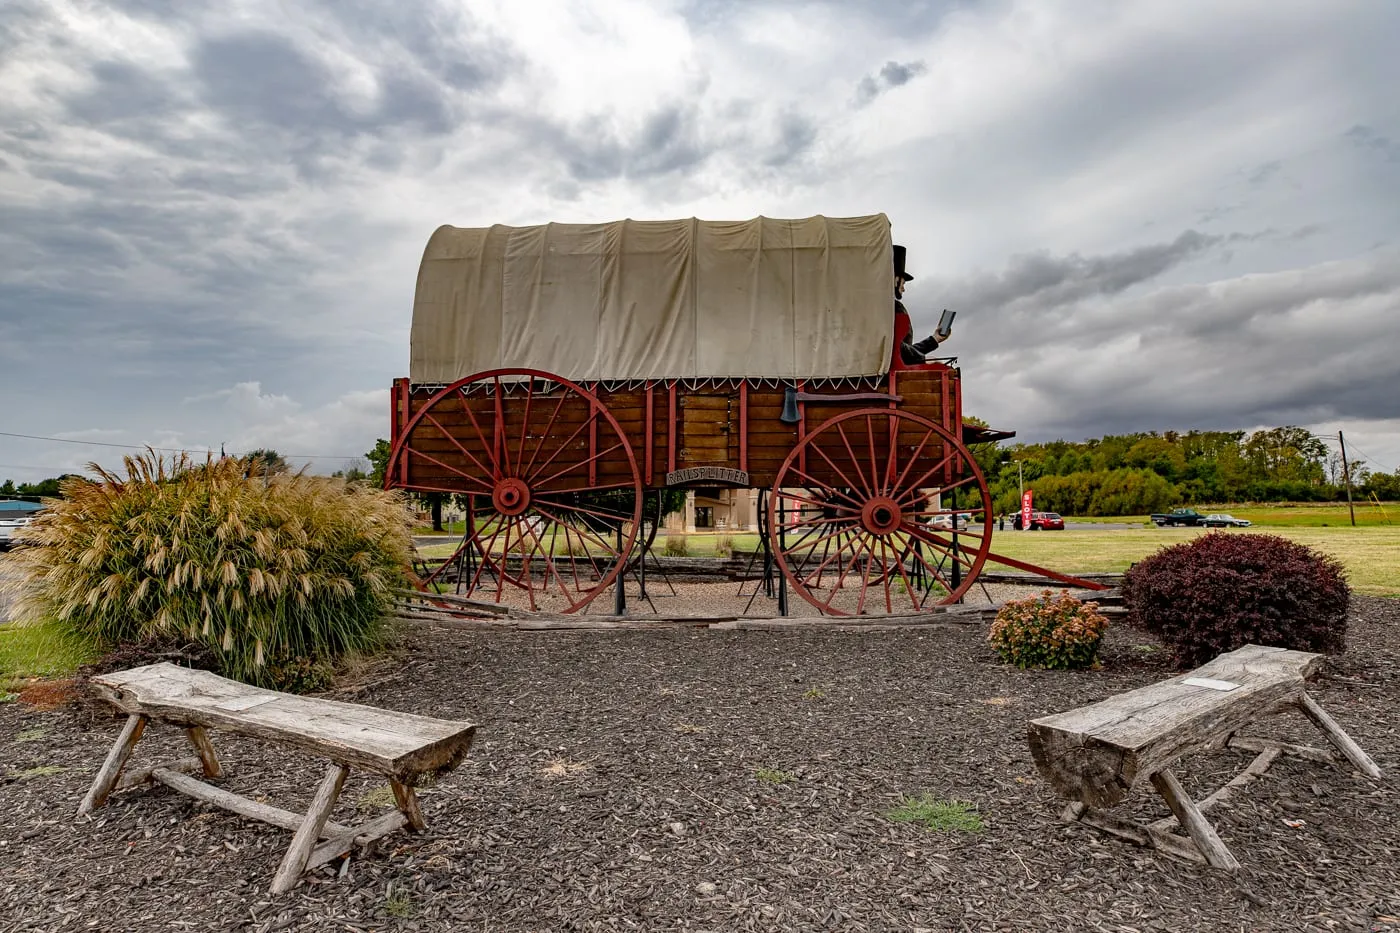 Giant Abraham Lincoln statue on the World's Largest Covered Wagon in Lincoln, Illinois Route 66 roadside attraction